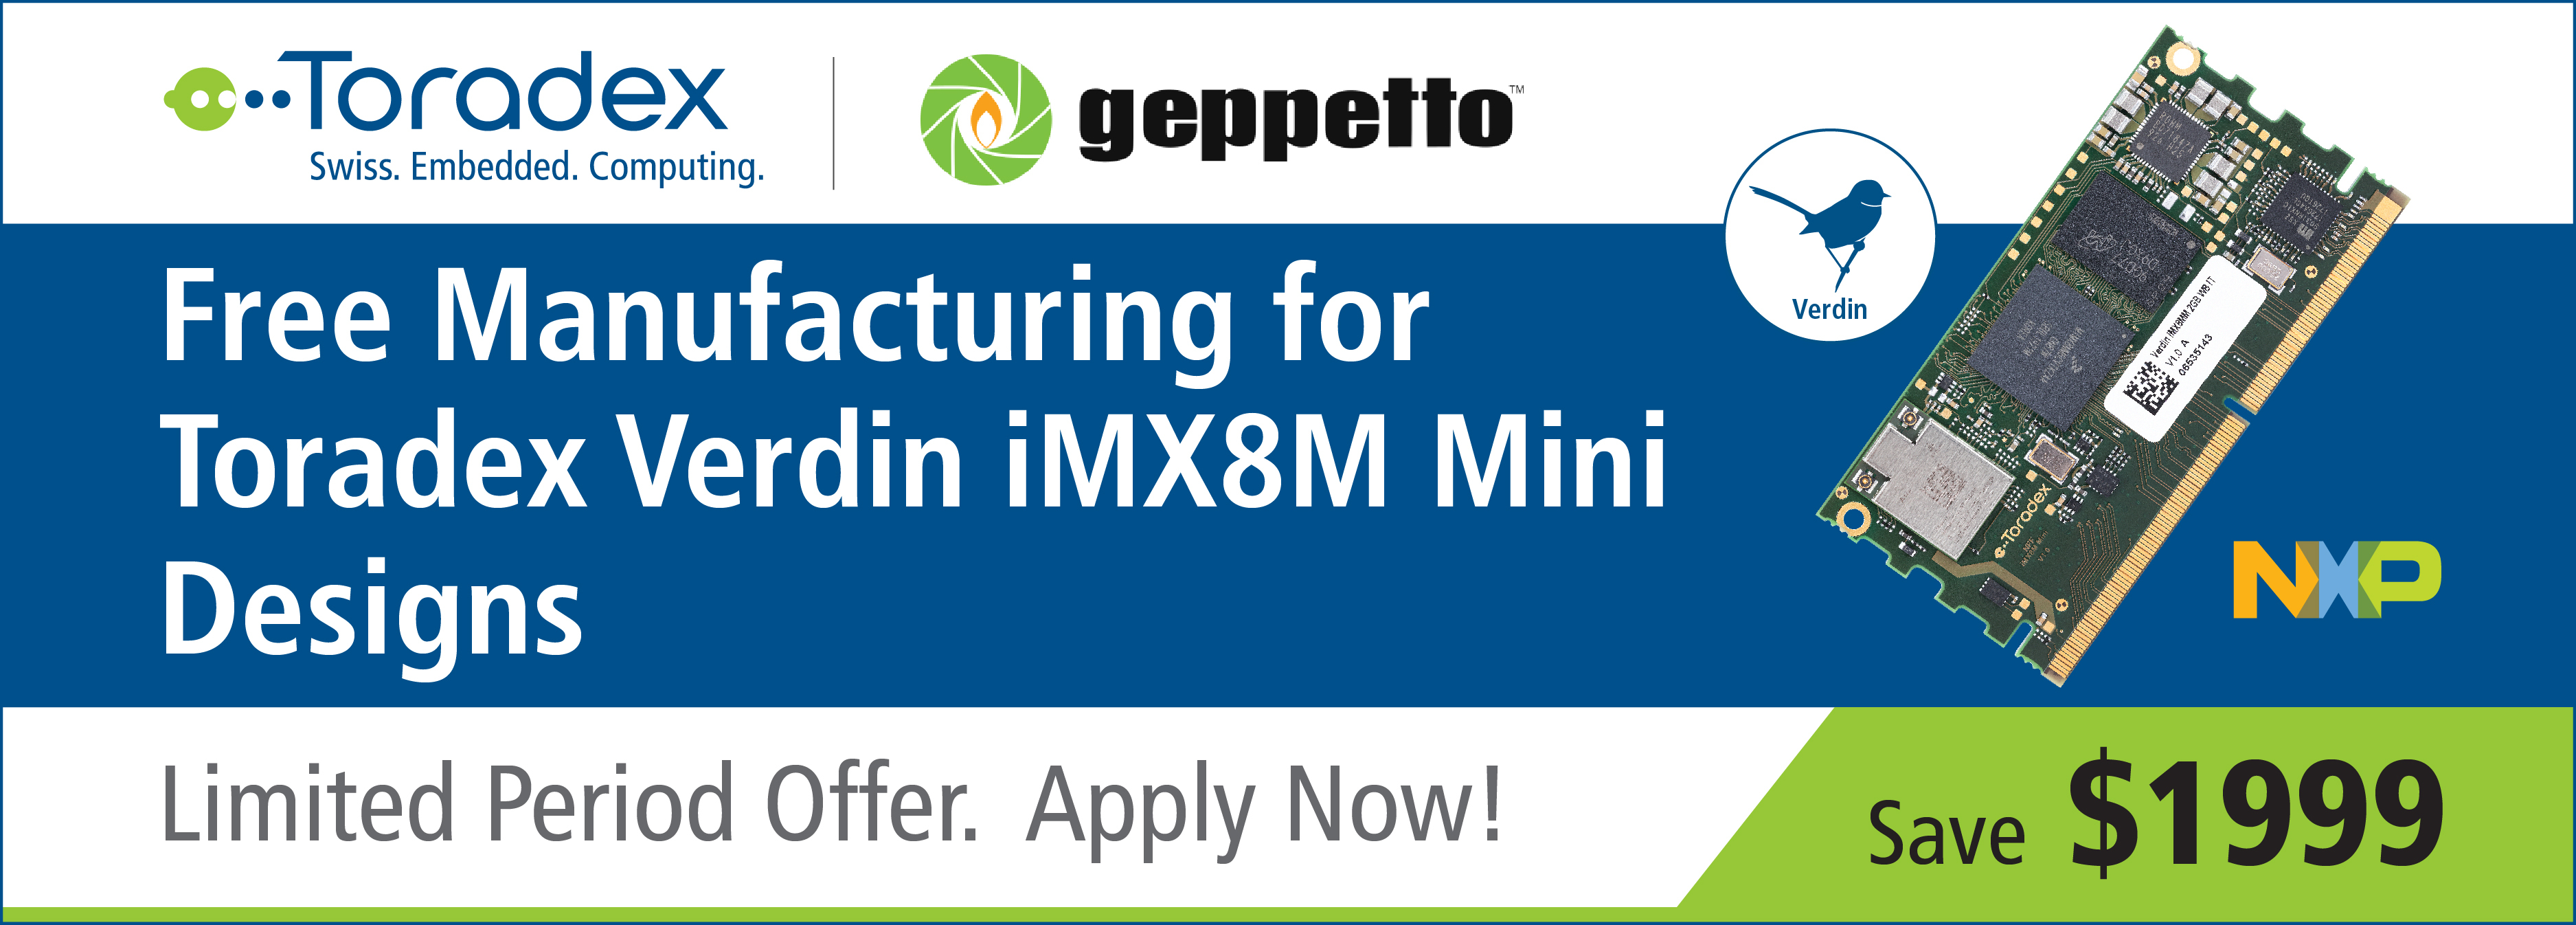 Free Manufacturing for Toradex Verdin iMX8M Mini Desings on Geppetto. Limited Time. Apply Now!